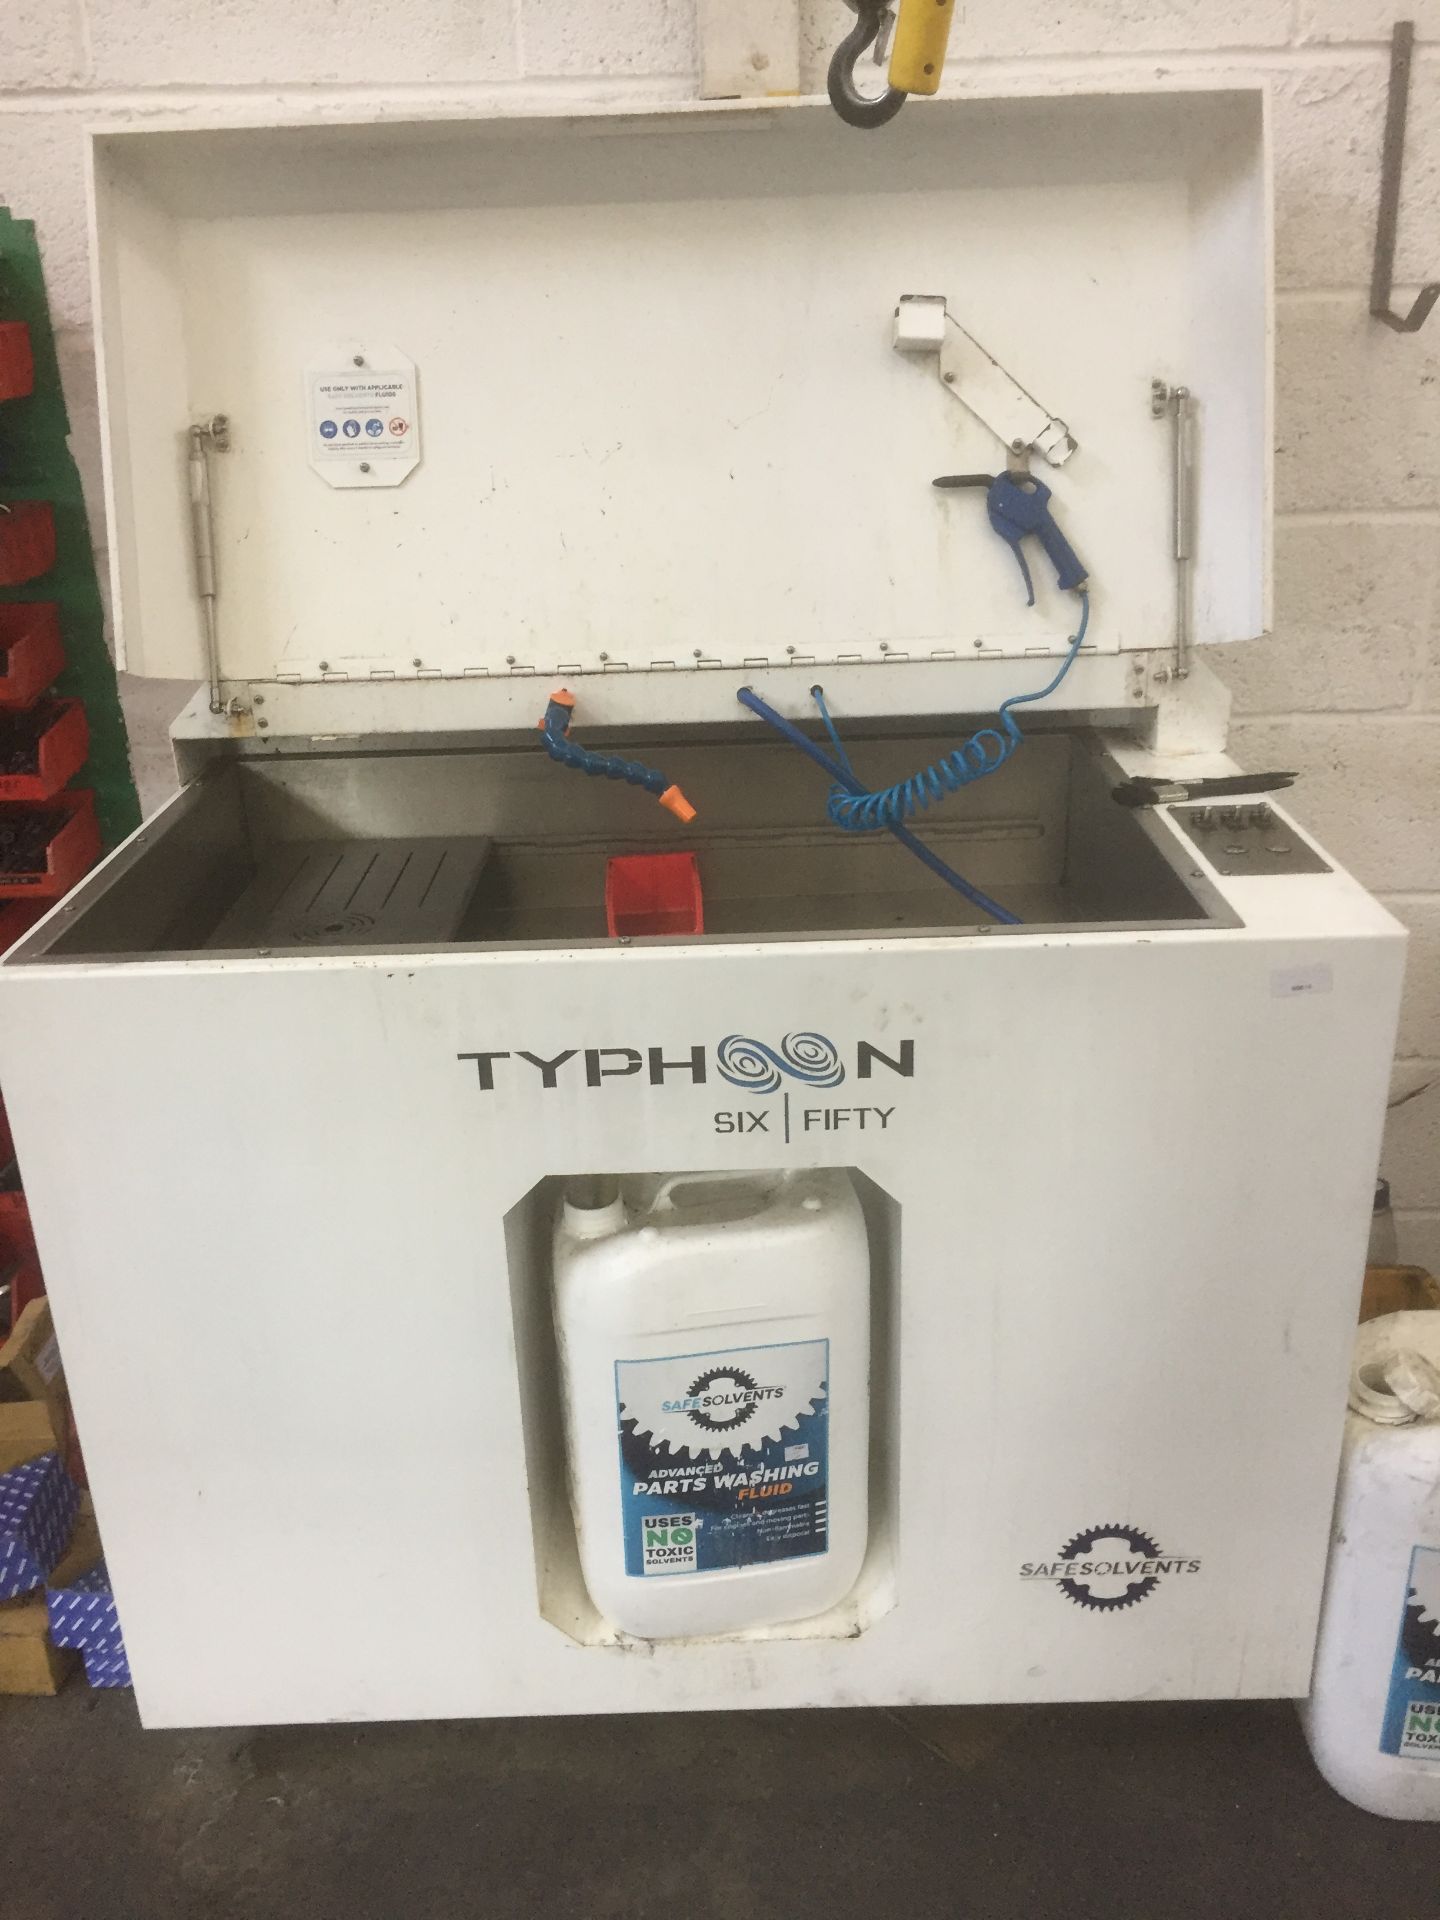 Typhoon Six/Fifty parts cleaner